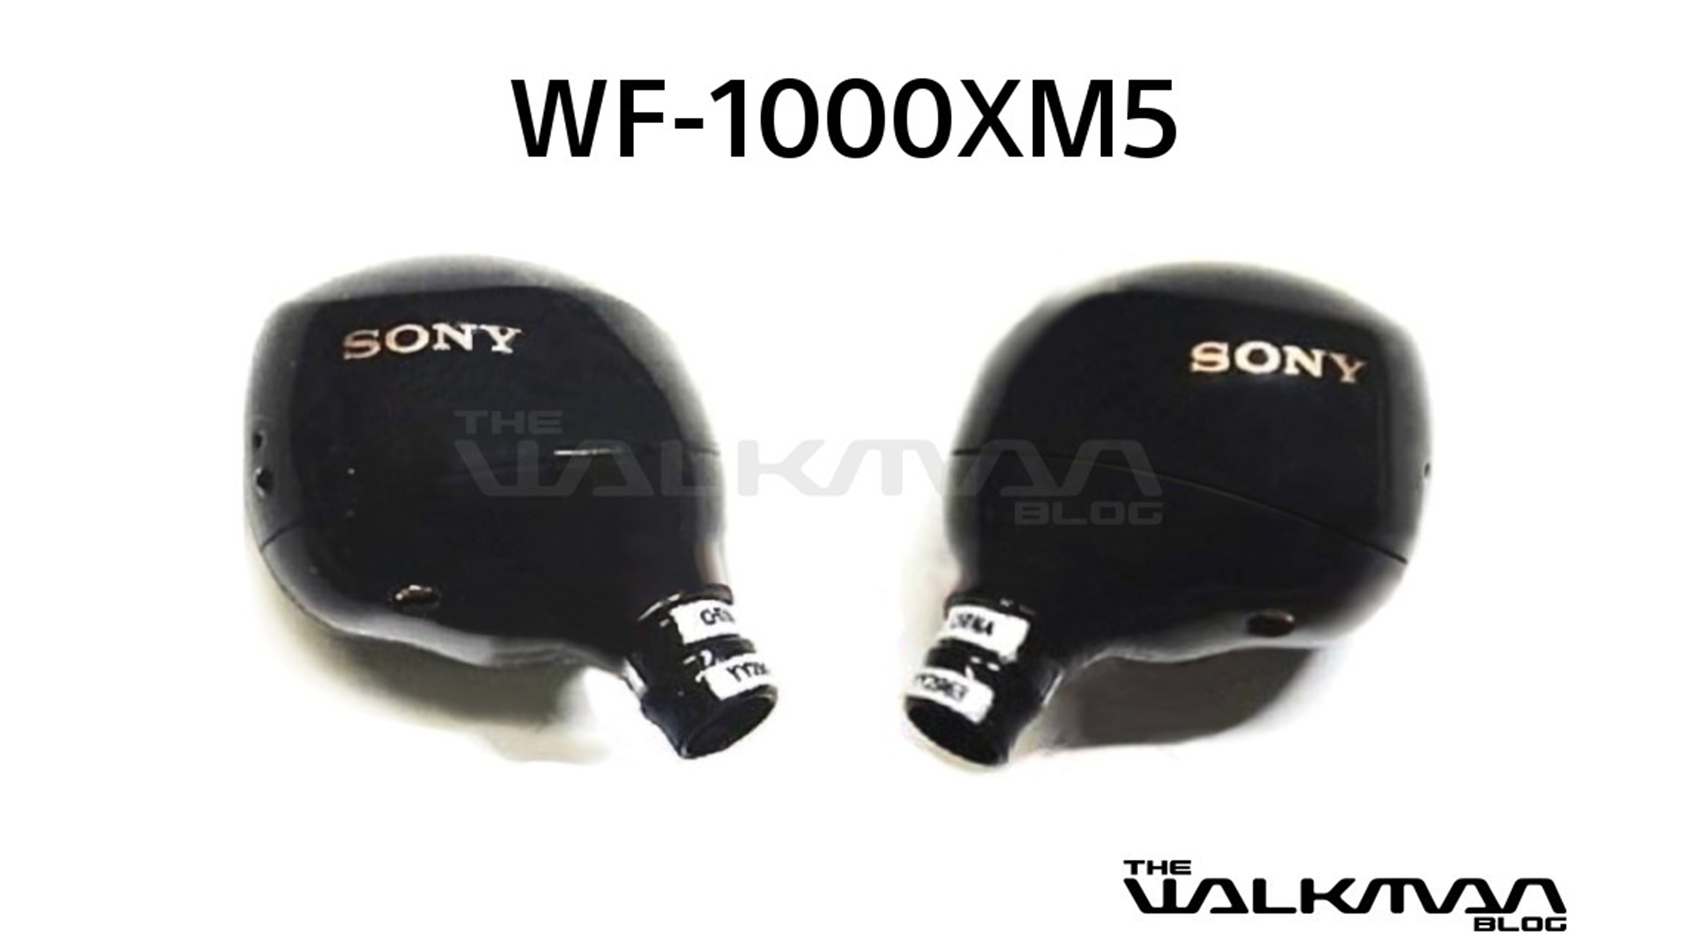 A leak of the Sony WF 1000XM5 earbuds.